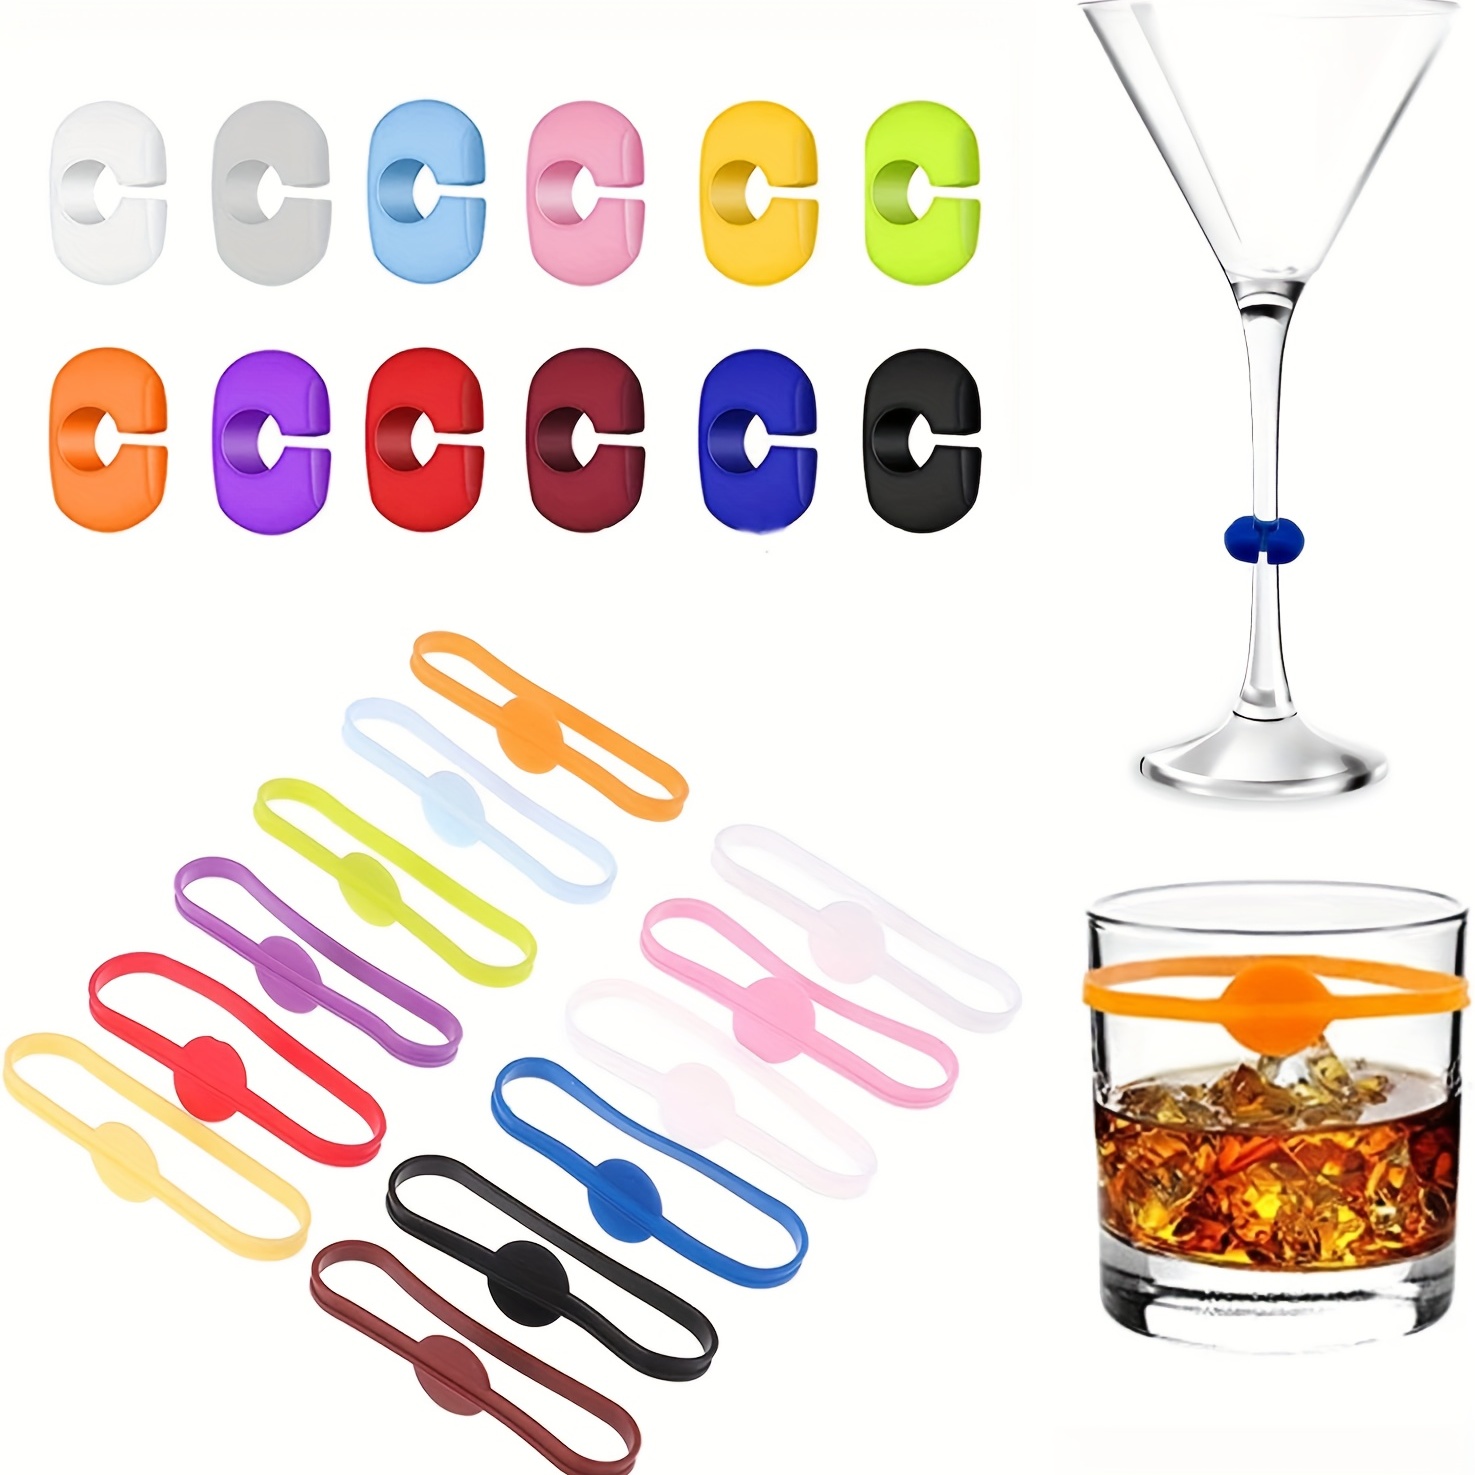 12Pcs Wine Glass Markers Set Of 12 Mini Circle Silicone Drink Glass Charms  Tags Recognizer Cup Labels Signs For Party Bar